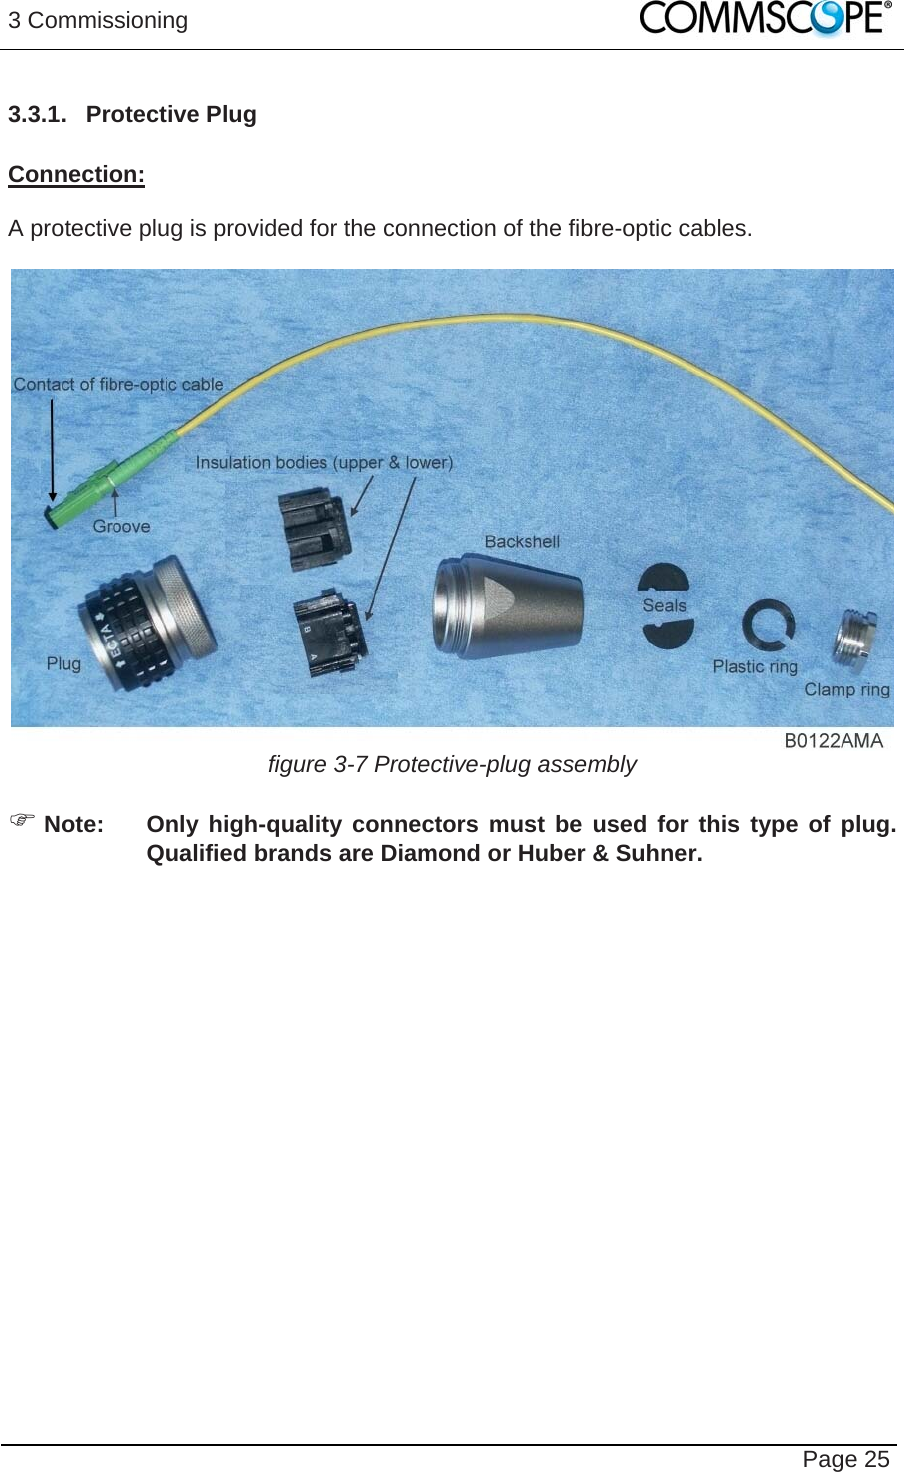 3 Commissioning   Page 25 3.3.1. Protective Plug  Connection:  A protective plug is provided for the connection of the fibre-optic cables.   figure 3-7 Protective-plug assembly   Note:  Only high-quality connectors must be used for this type of plug. Qualified brands are Diamond or Huber &amp; Suhner.  